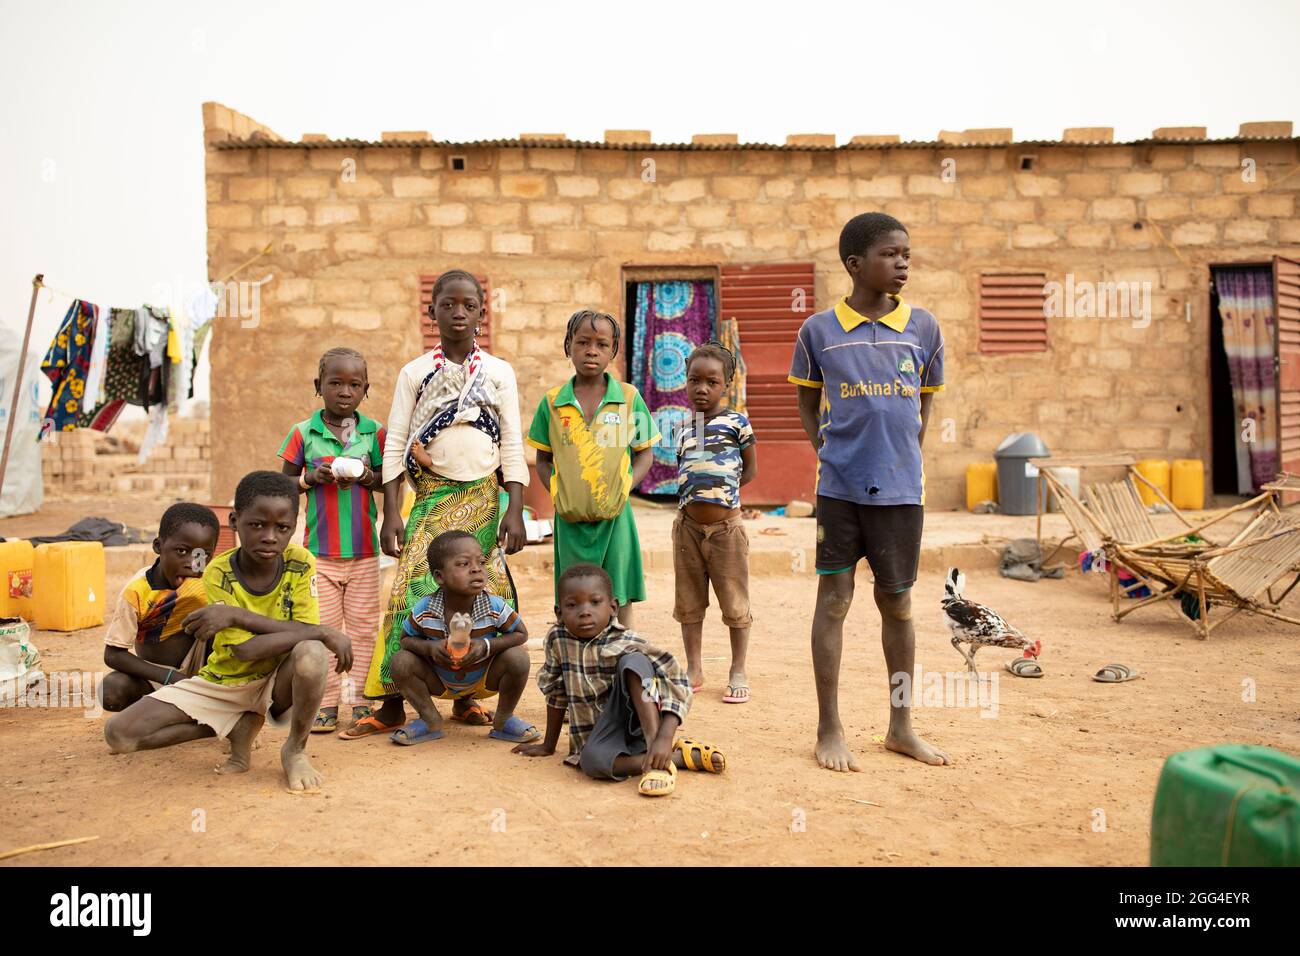 Sons, daughters, nieces and nephews from and extended  family huddle together in a compound where more than 30 of their family members stay in Nouna, Burkina Faso. The extended family has been displaced due to violence and insecurity and now faces hunger and food shortages. Stock Photo